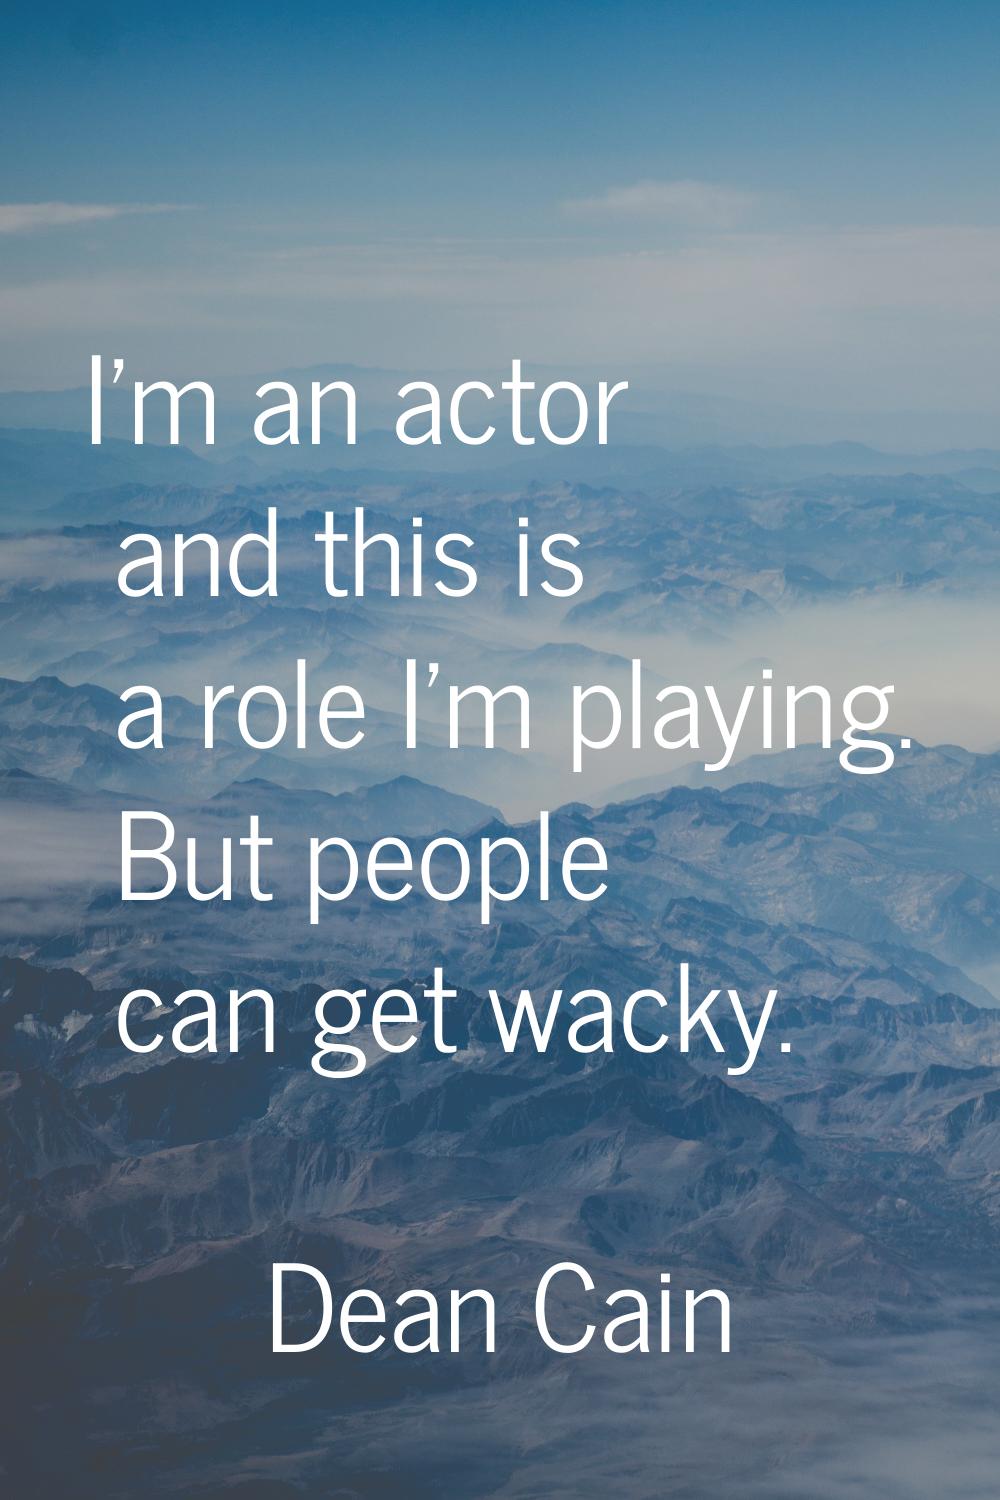 I'm an actor and this is a role I'm playing. But people can get wacky.